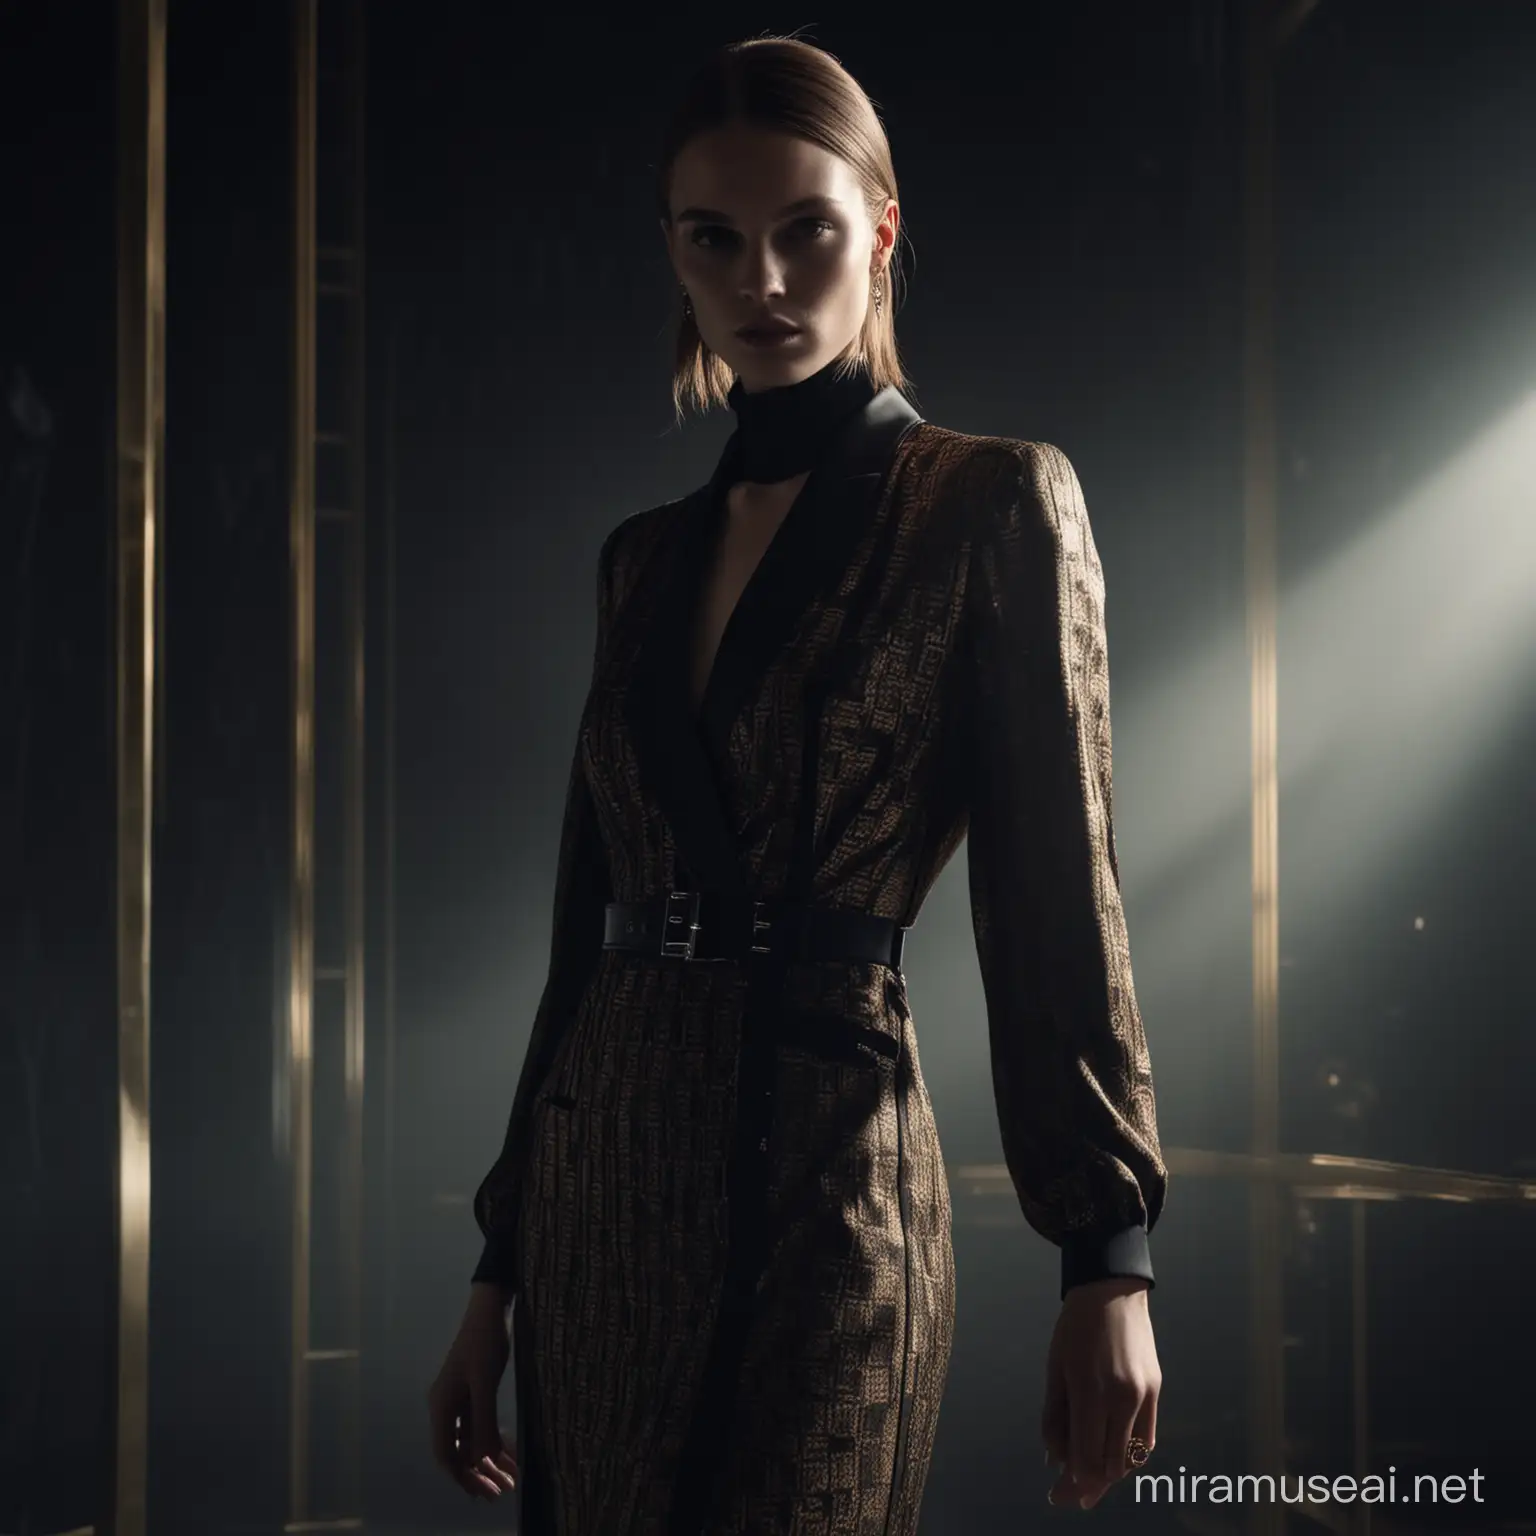 A sleek and sophisticated (((professional fashion shoot))) for Gucci's latest Vogue Ukraine campaign, featuring a single model elegantly posing in a modern dress under ((dramatic cinematic lighting)) with a dark, luxurious backdrop